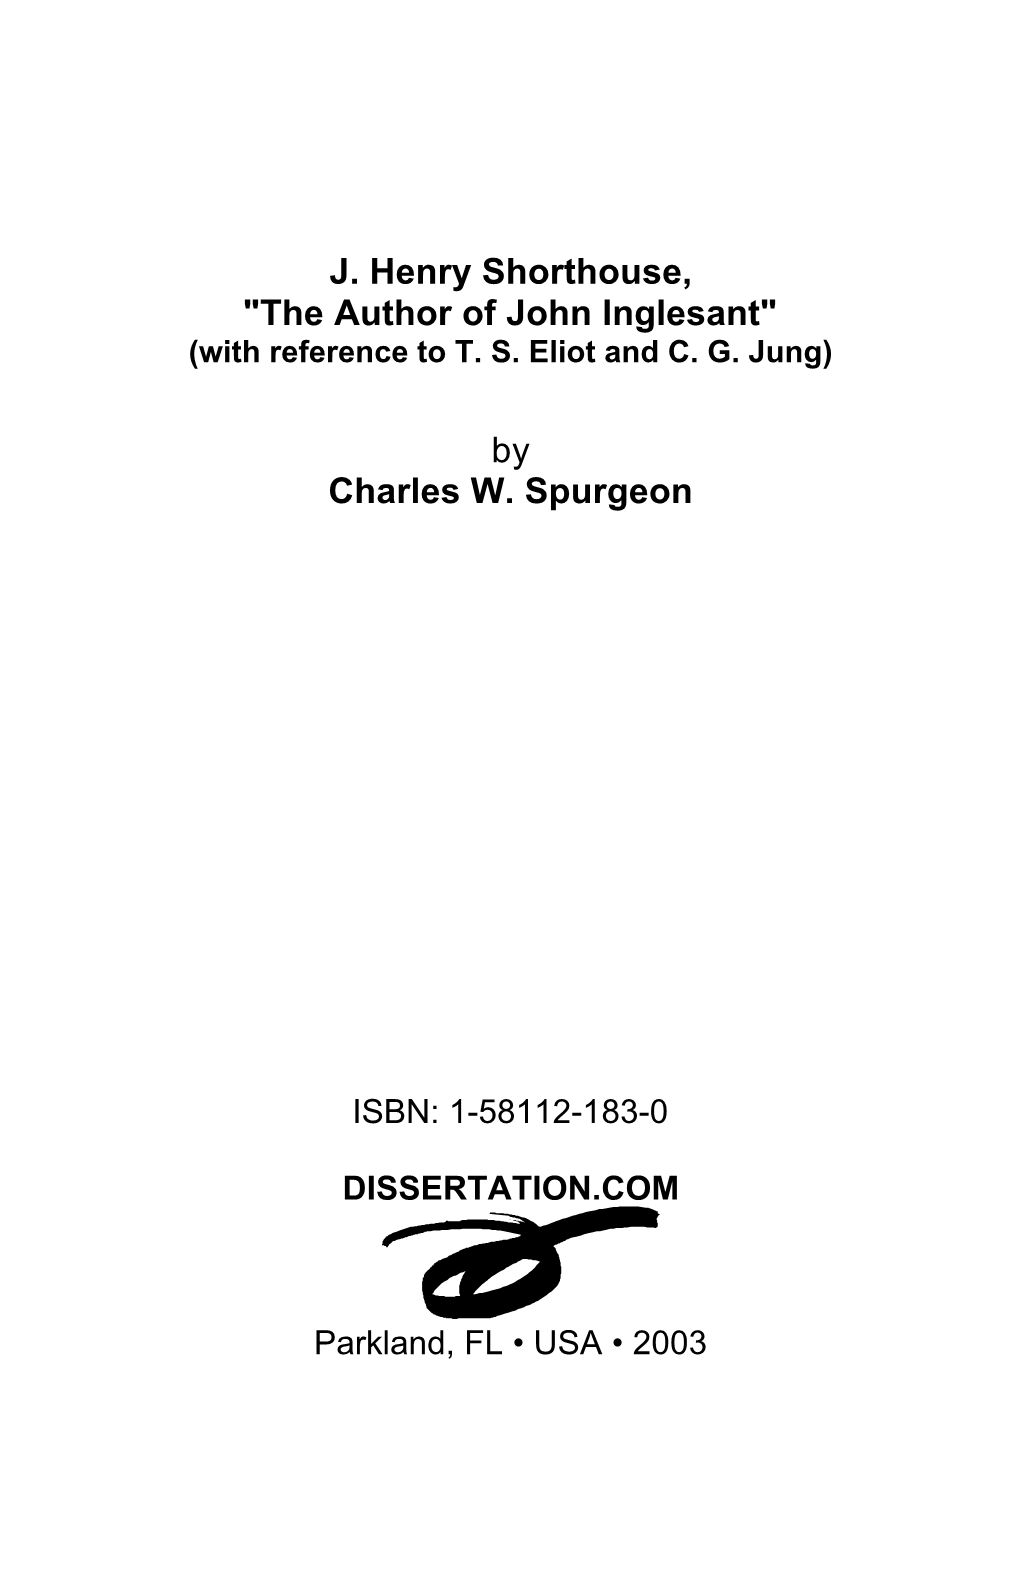 J. Henry Shorthouse, "The Author of John Inglesant" (With Reference to T